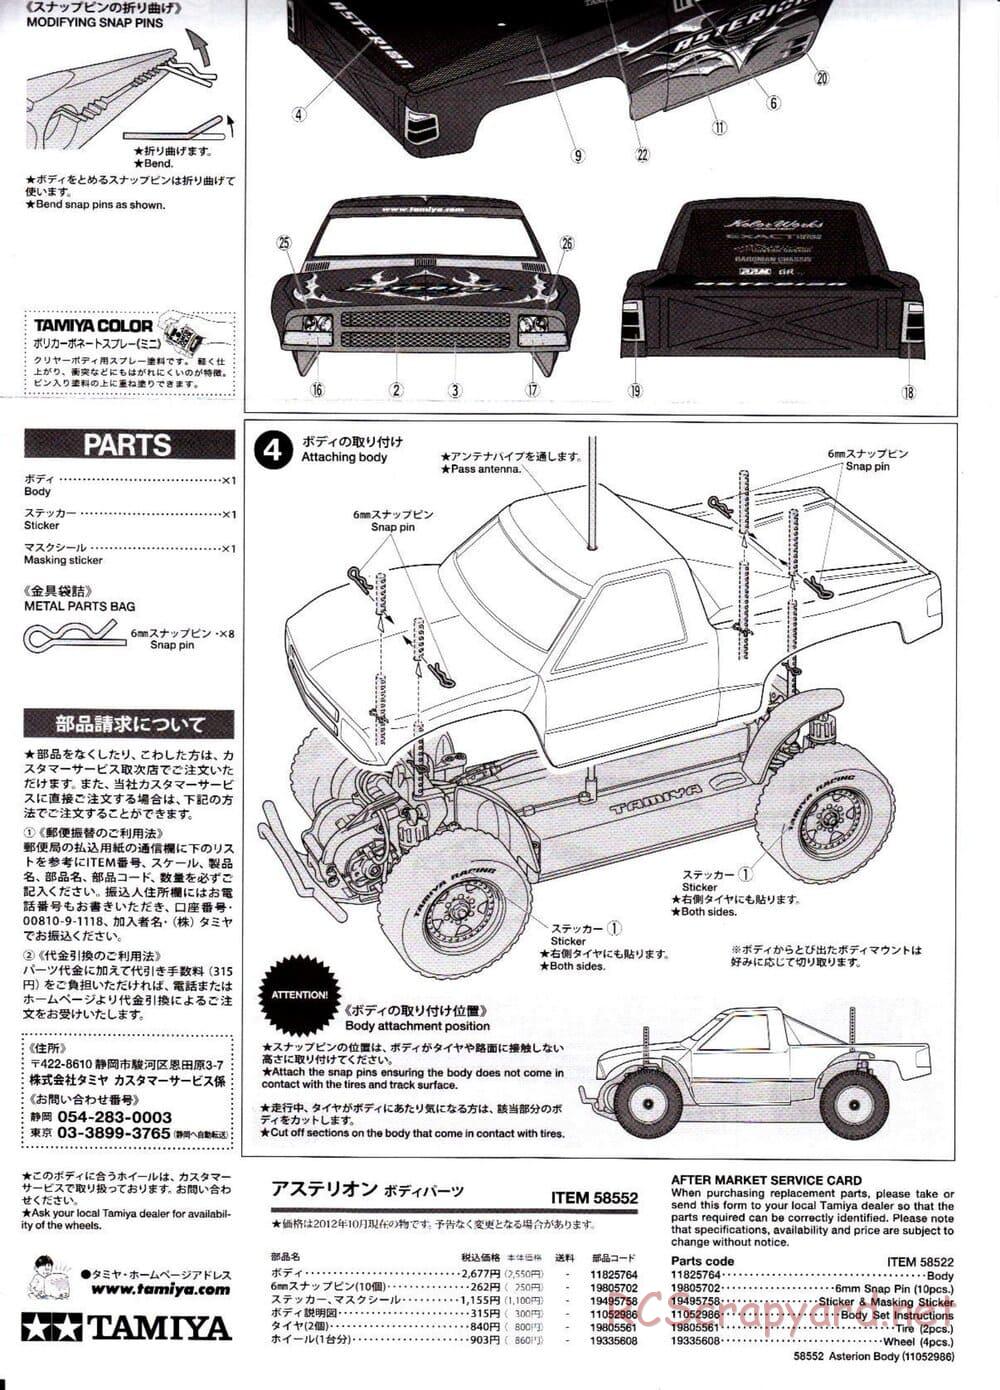 Tamiya - Asterion - XV-01T Chassis - Body Manual - Page 4